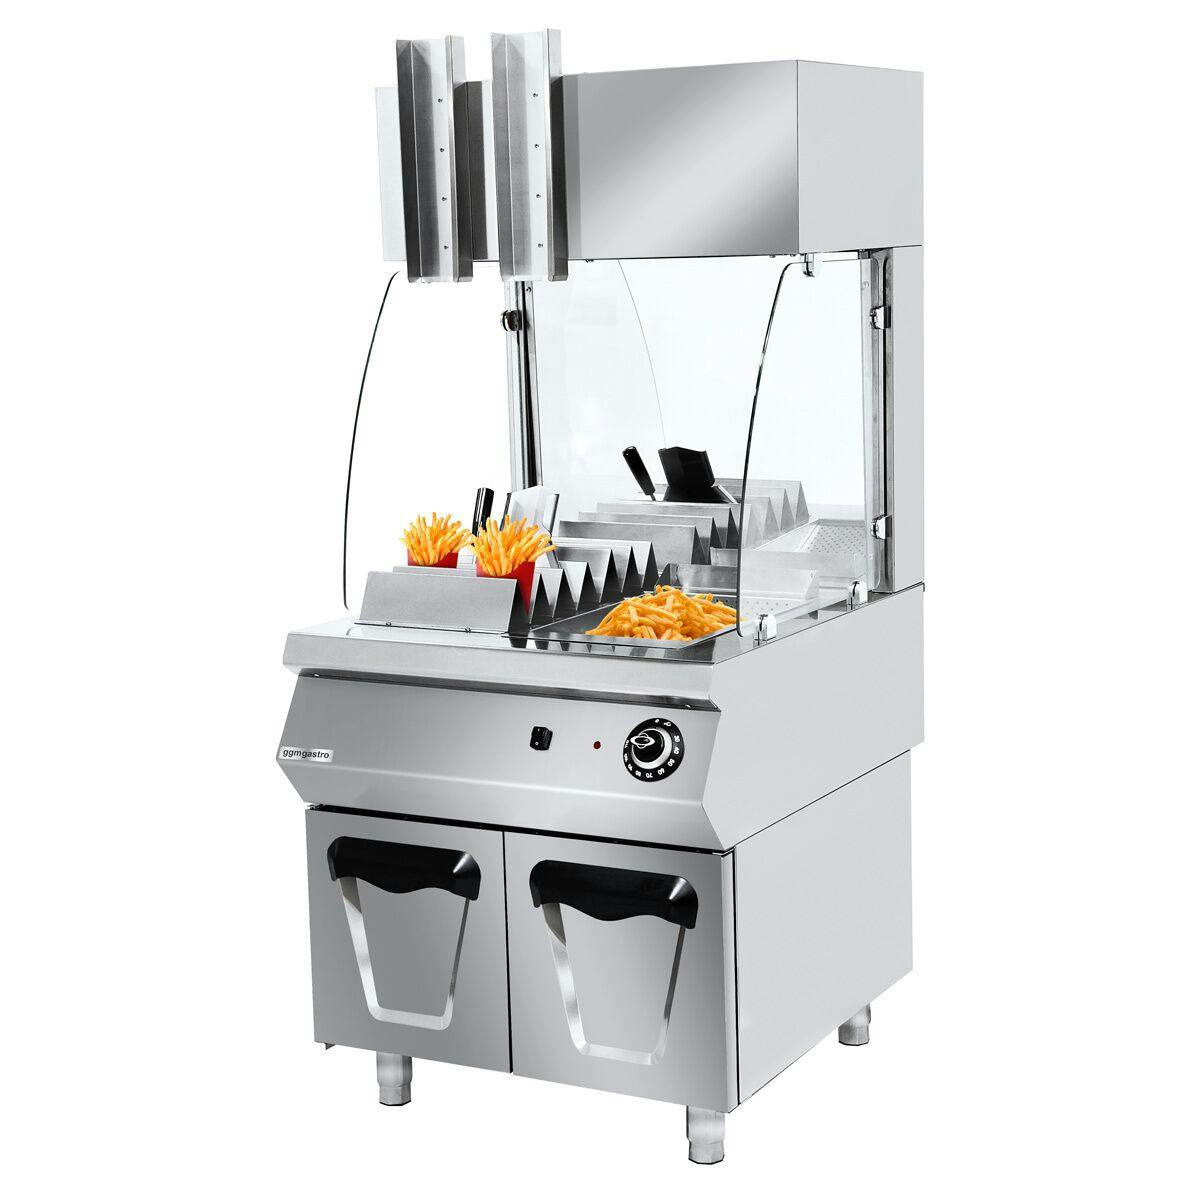 Electric - French fries warmer with substructure